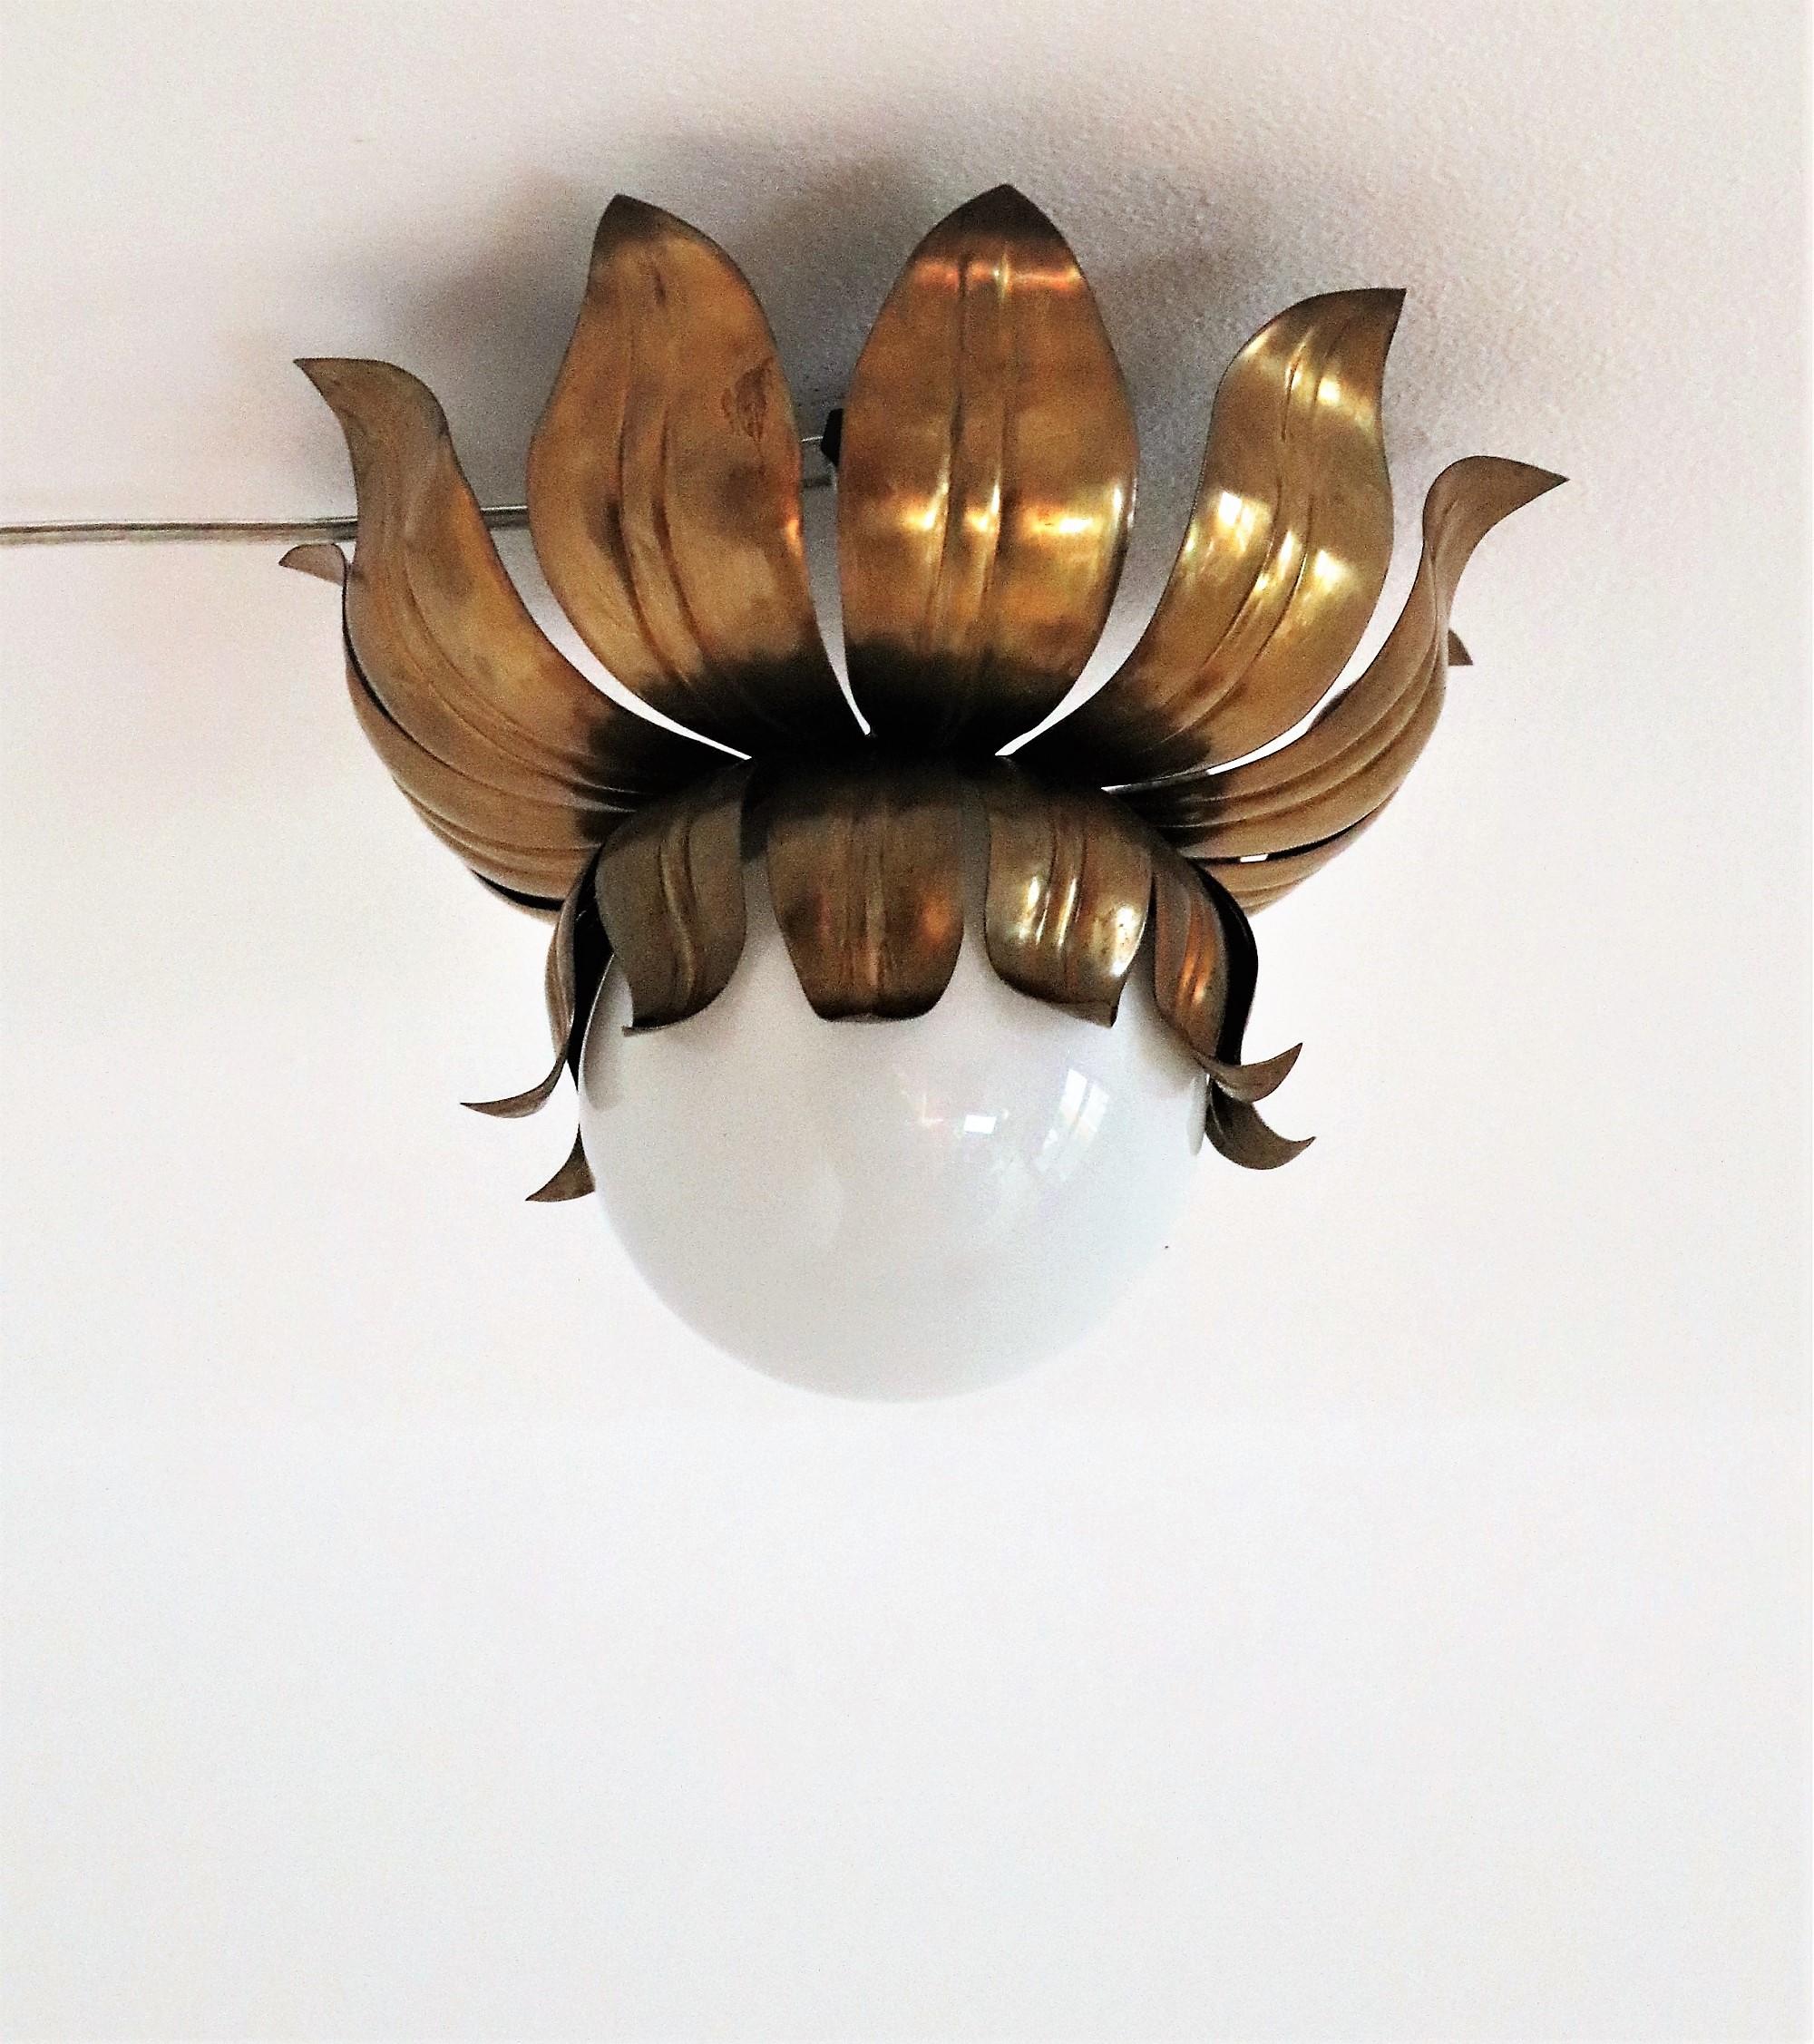 Gorgeous tiny ceiling lamp or flushmount light made of full brass and with white glass ball.
Made in Italy in the 1950s

The light is beautiful to see when illuminated and not.
It is in very good vintage and working condition with normal vintage